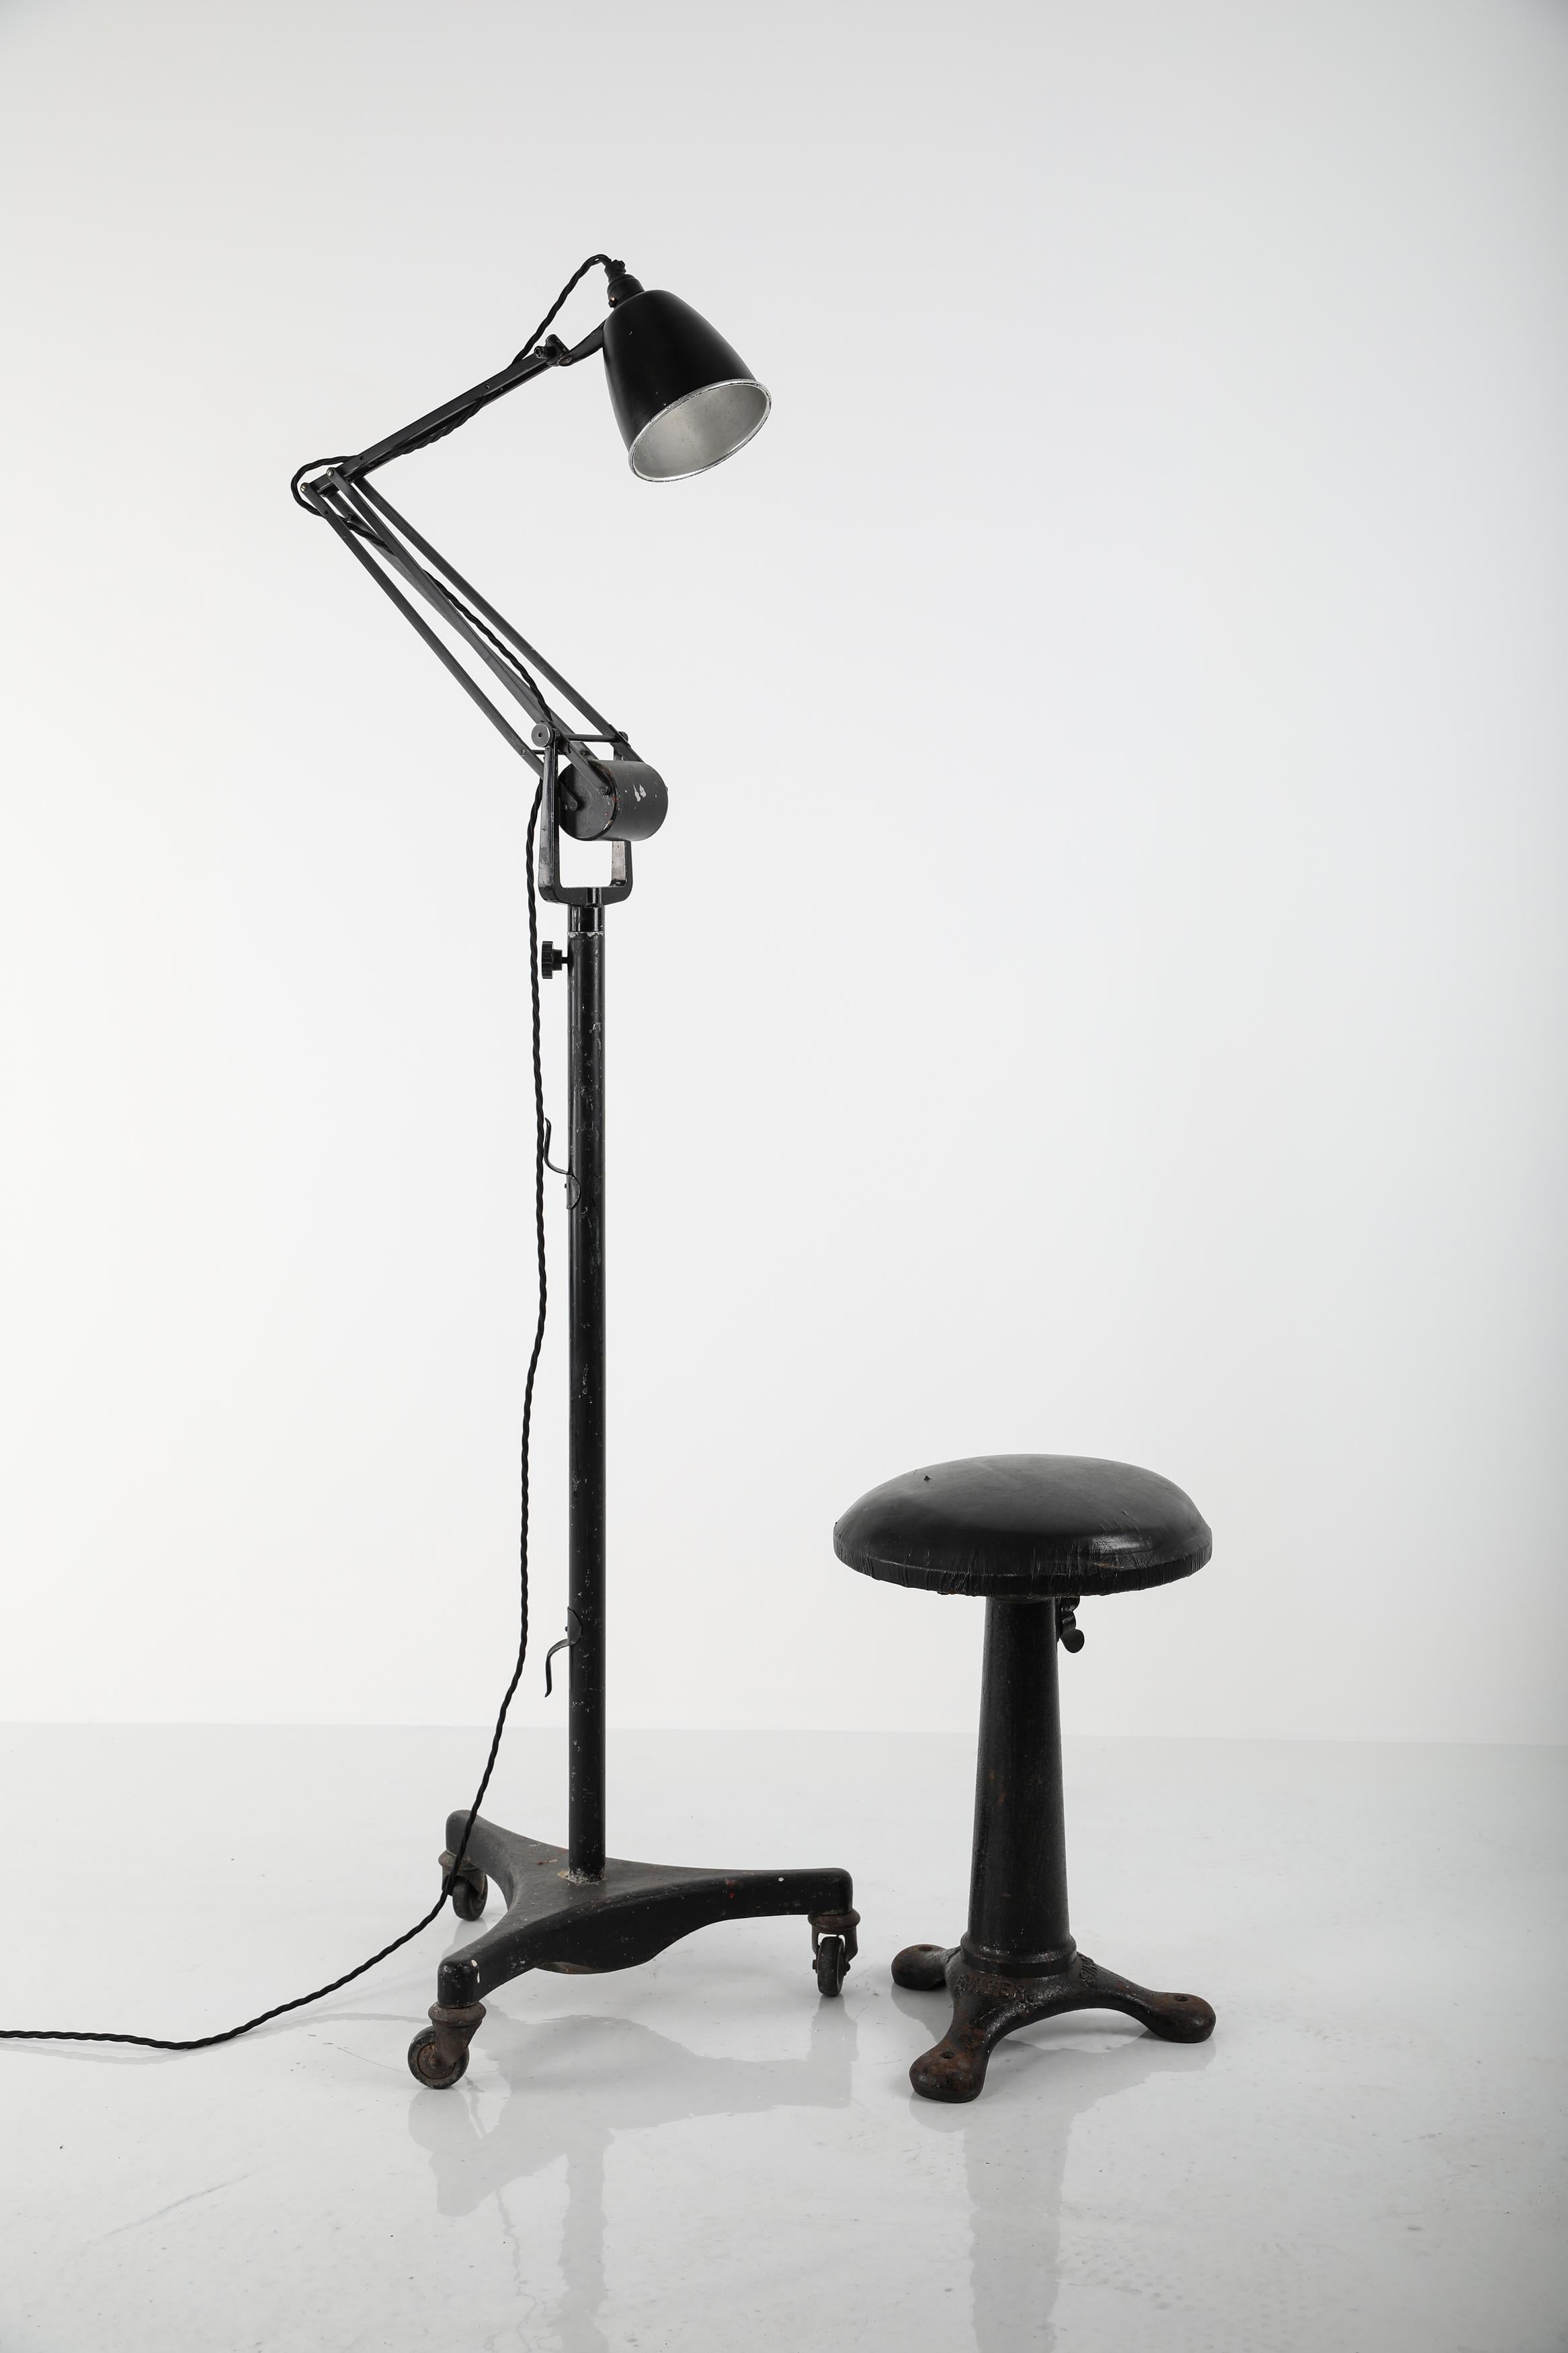 Stunning example of the iconic counterbalance 'Roller' lamp, ingeniously designed by Hadrill & Horstmann. c.1940

Often utilised by draughtsman, this example was found in a private workshop and has survived in wonderful original condition; the